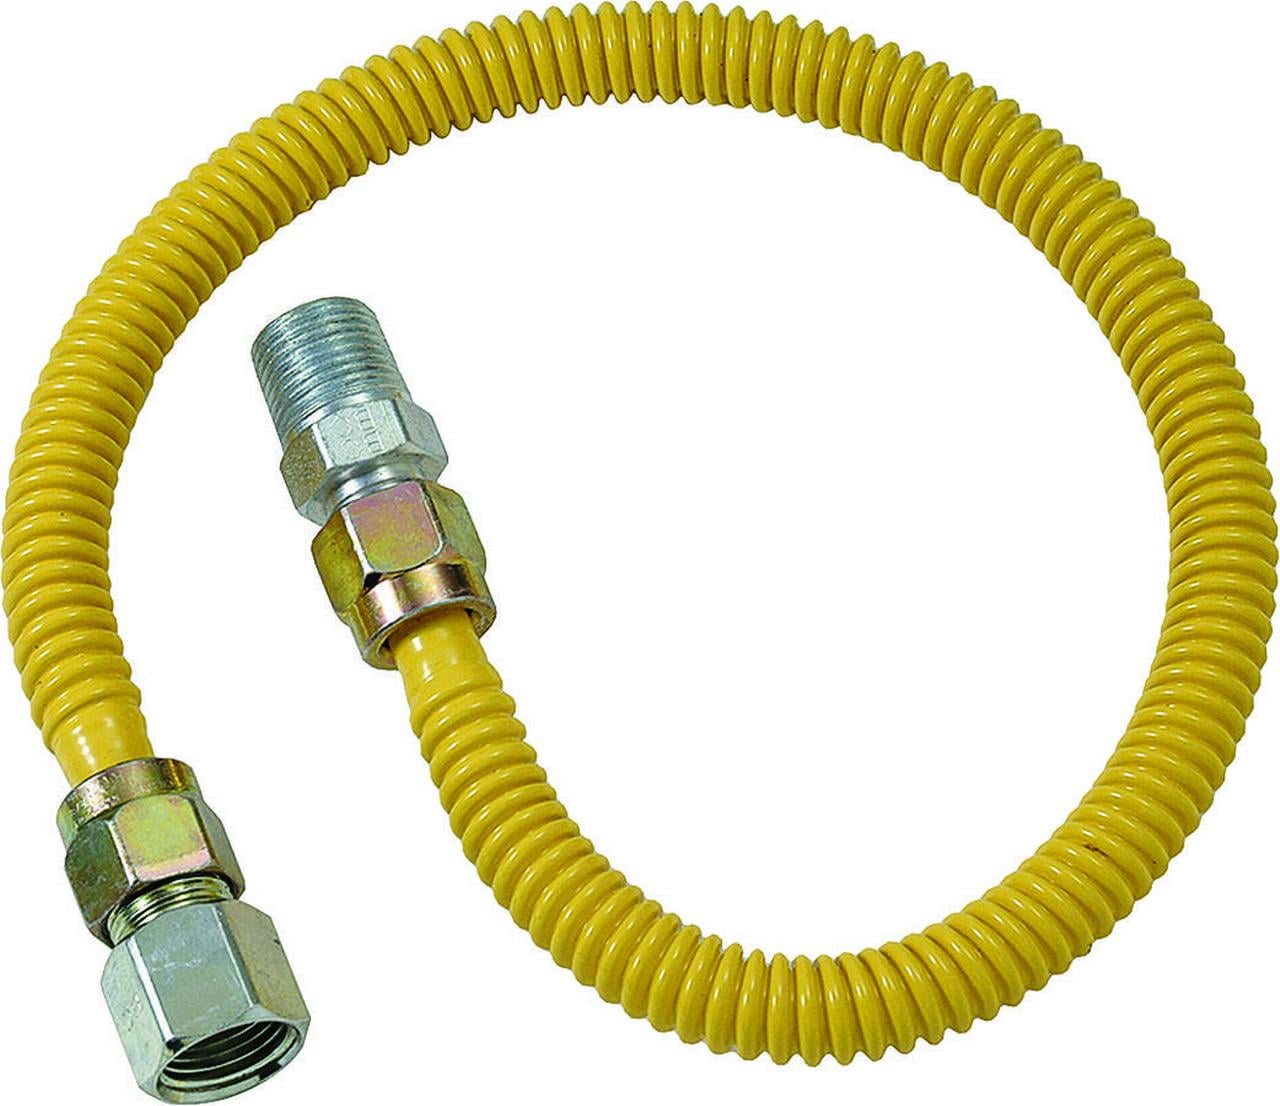 1/2-Inch OD Connector with 1/2-Inch MIP X 1/2-Inch FIP Fittings 36-Inch LASCO 10-1229 Flexible Coated Gas Water Heater Supply Line 